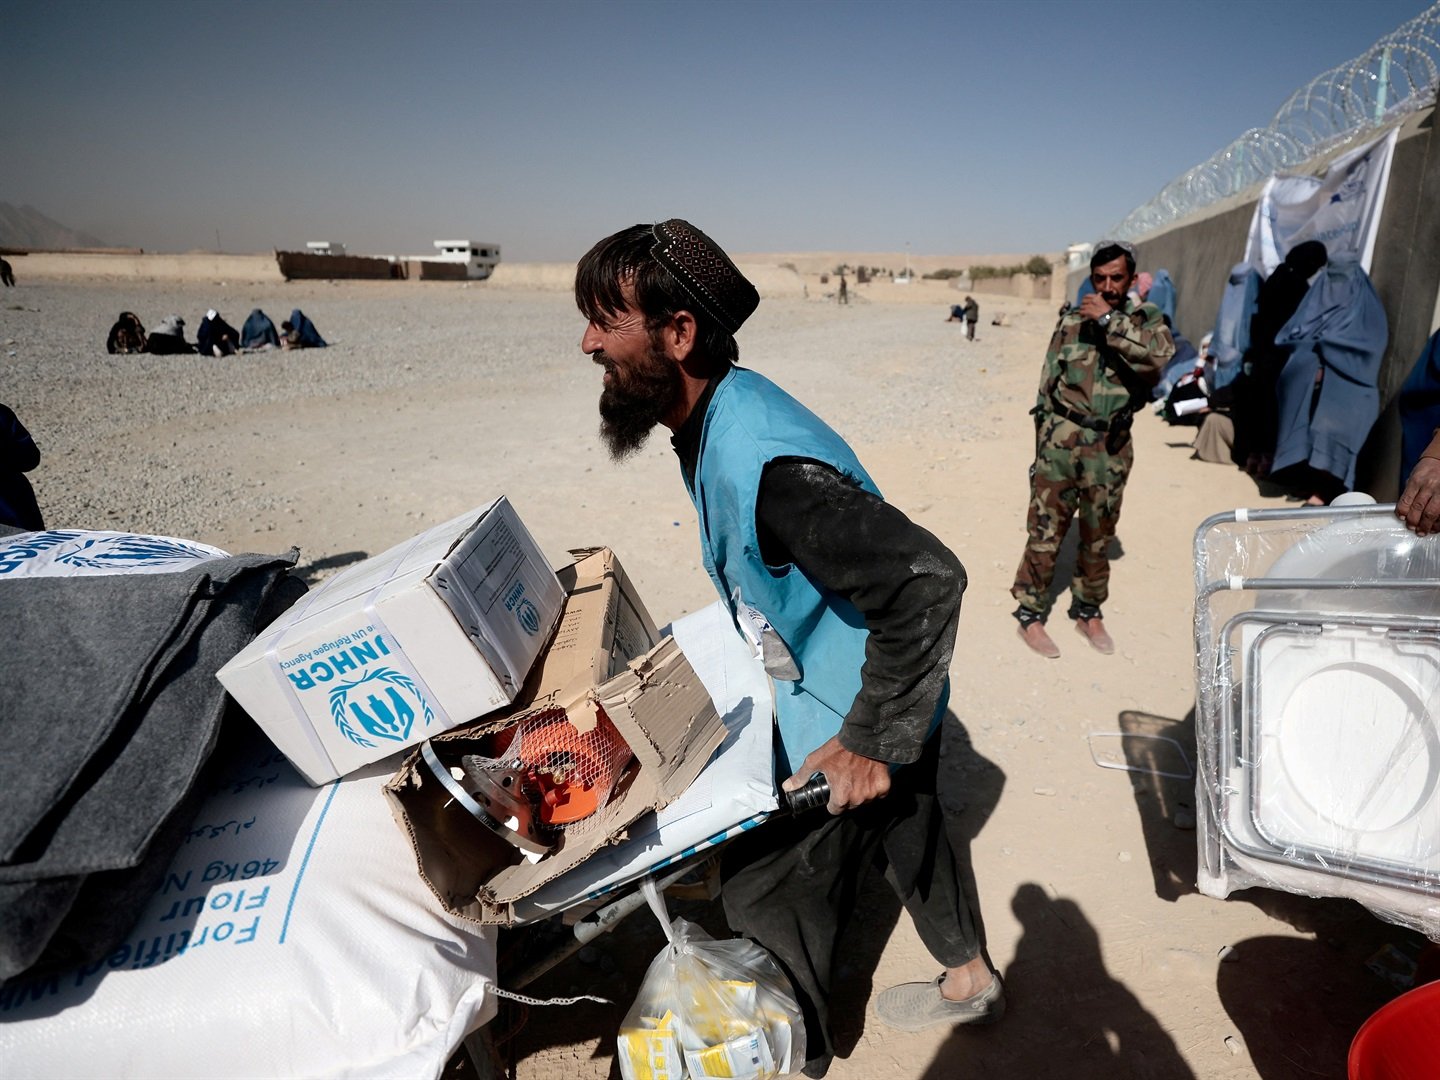 An UNHCR worker pushes a wheelbarrow loaded with aid supplies outside a distribution center in Kabul on Oct. 28, 2021. Zohra Bensemra/Reuters